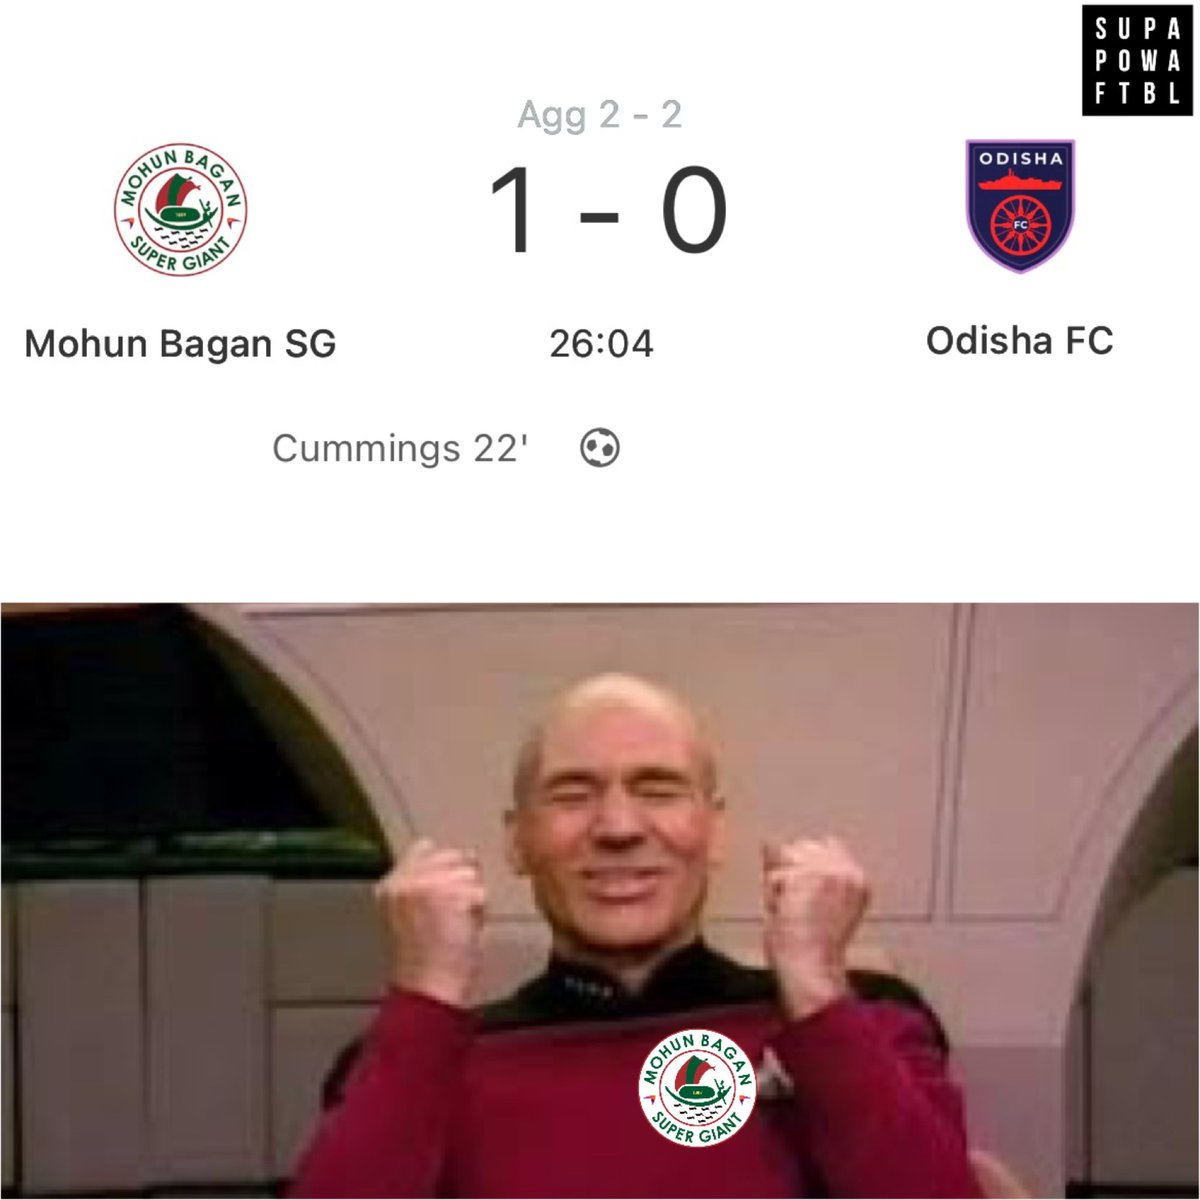 Mohun Bagan SG is back in the game! 💪

Jason Cummings equalizes and makes it all level at the Salt Lake Stadium. 😎

Can The Mariners keep the momentum going? ⚽️🔥 

#MohunBagan #Equalizer #FootballFever #ISL10 #Playoffs #Mohunbagansg #OdishaFC #letsfootball